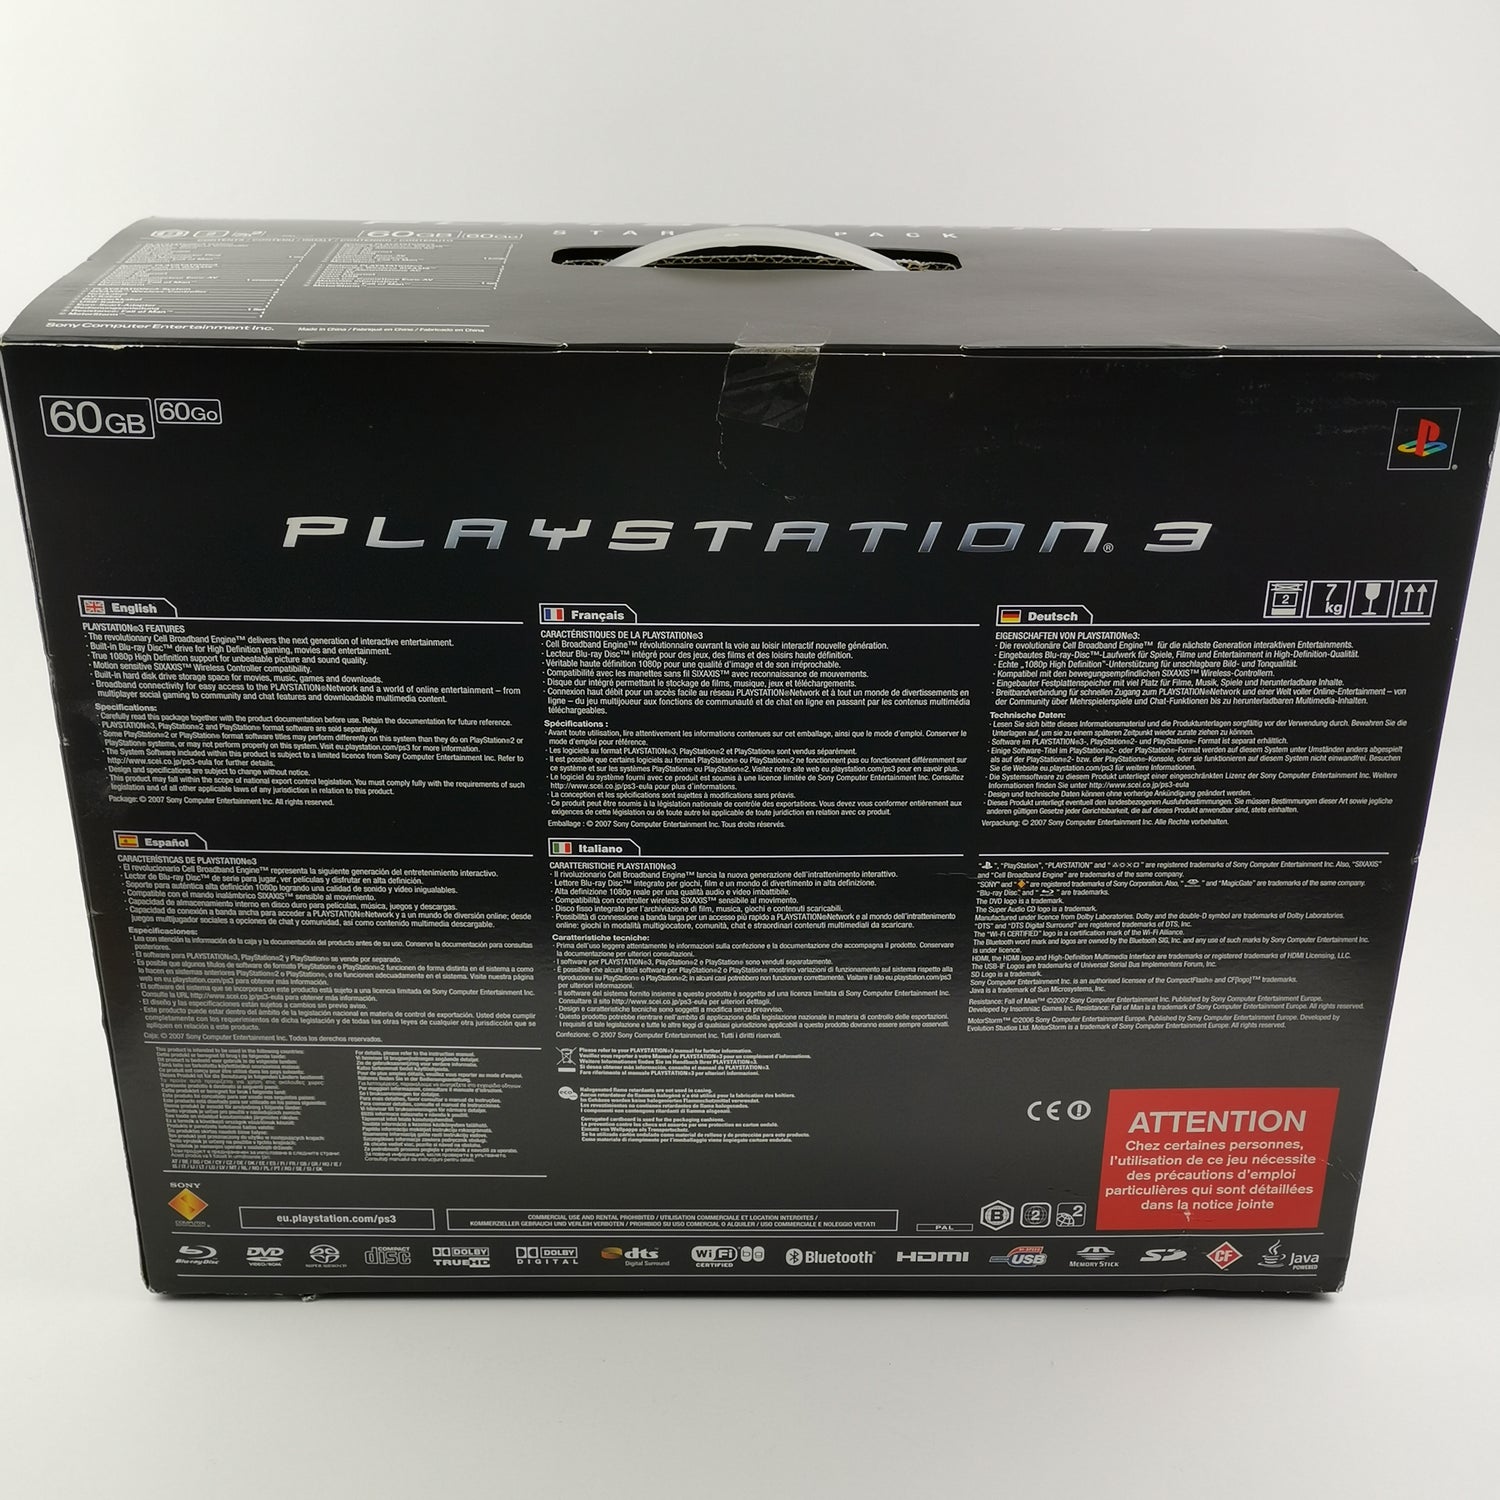 Sony Playstation 3 Console: Starter Pack incomplete - PS3 Console in original packaging PAL